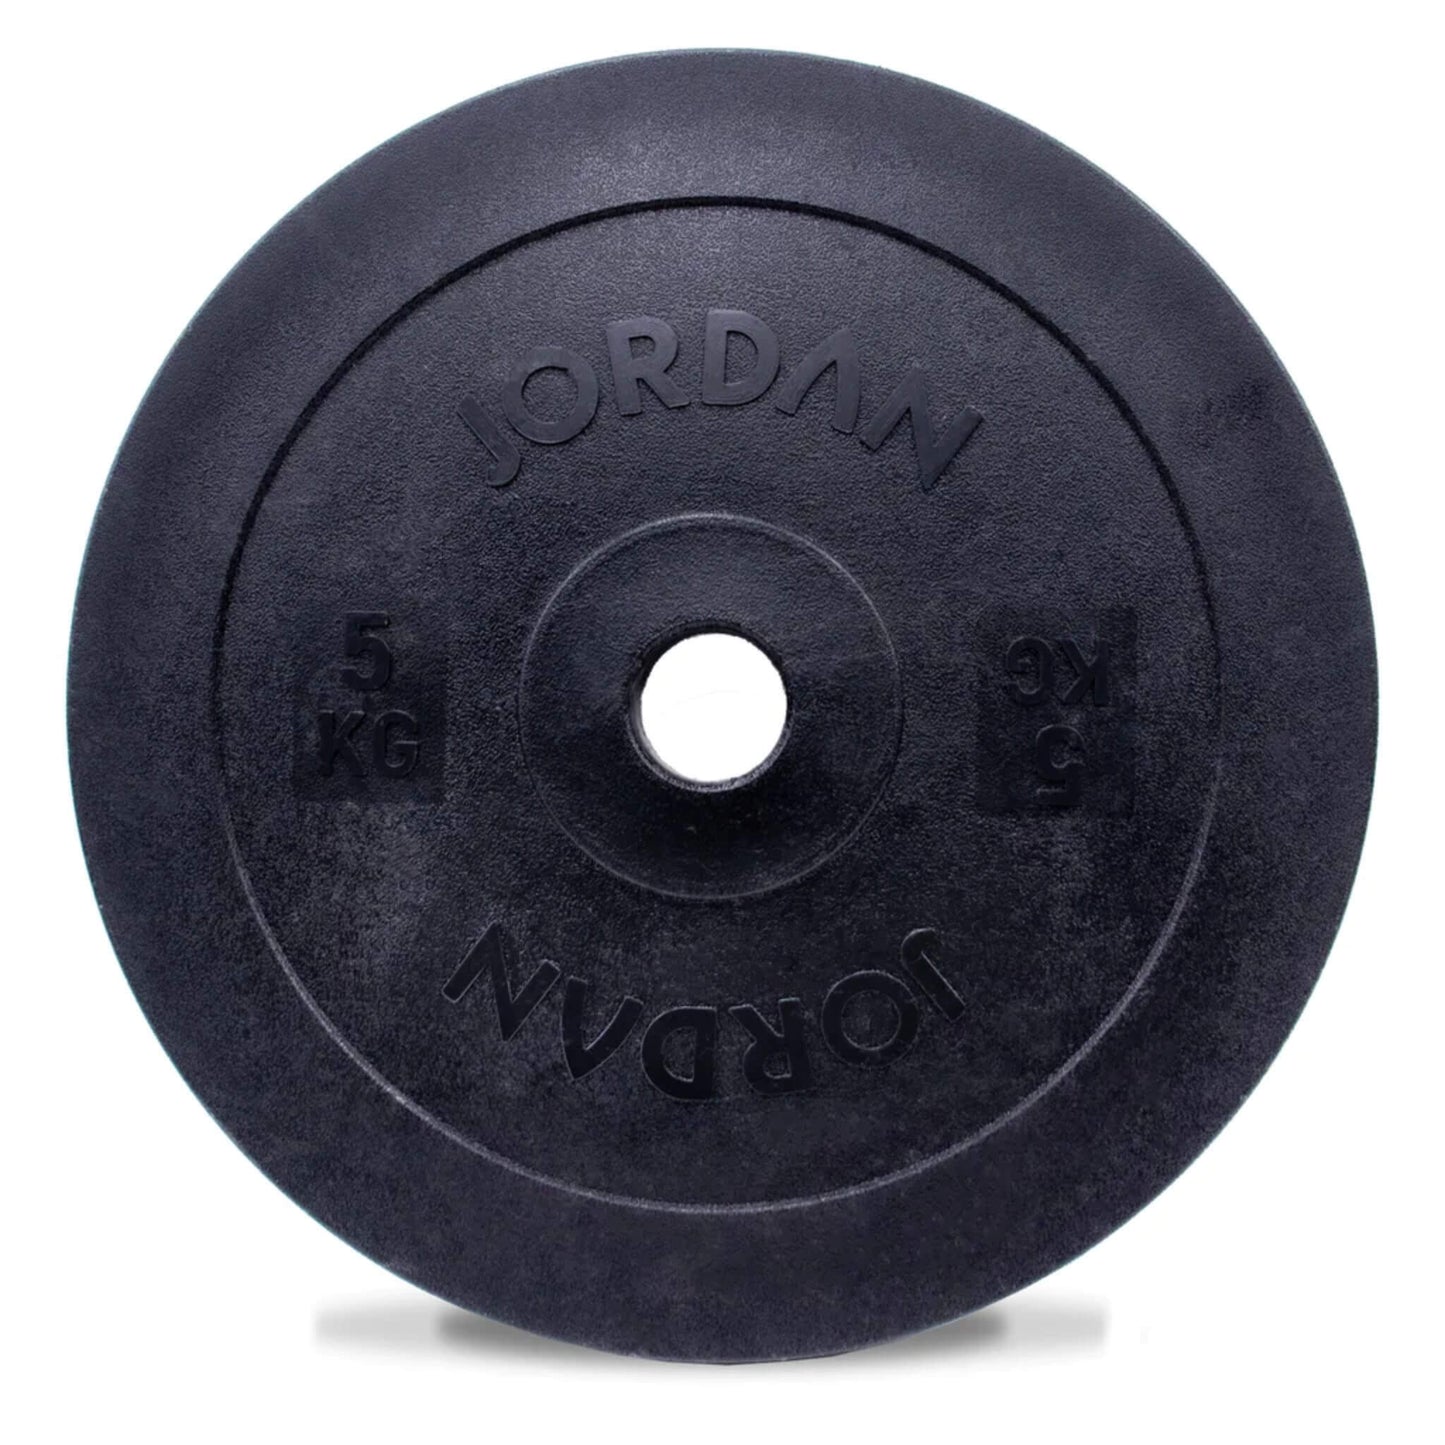 Full Size Olympic Technique Plates